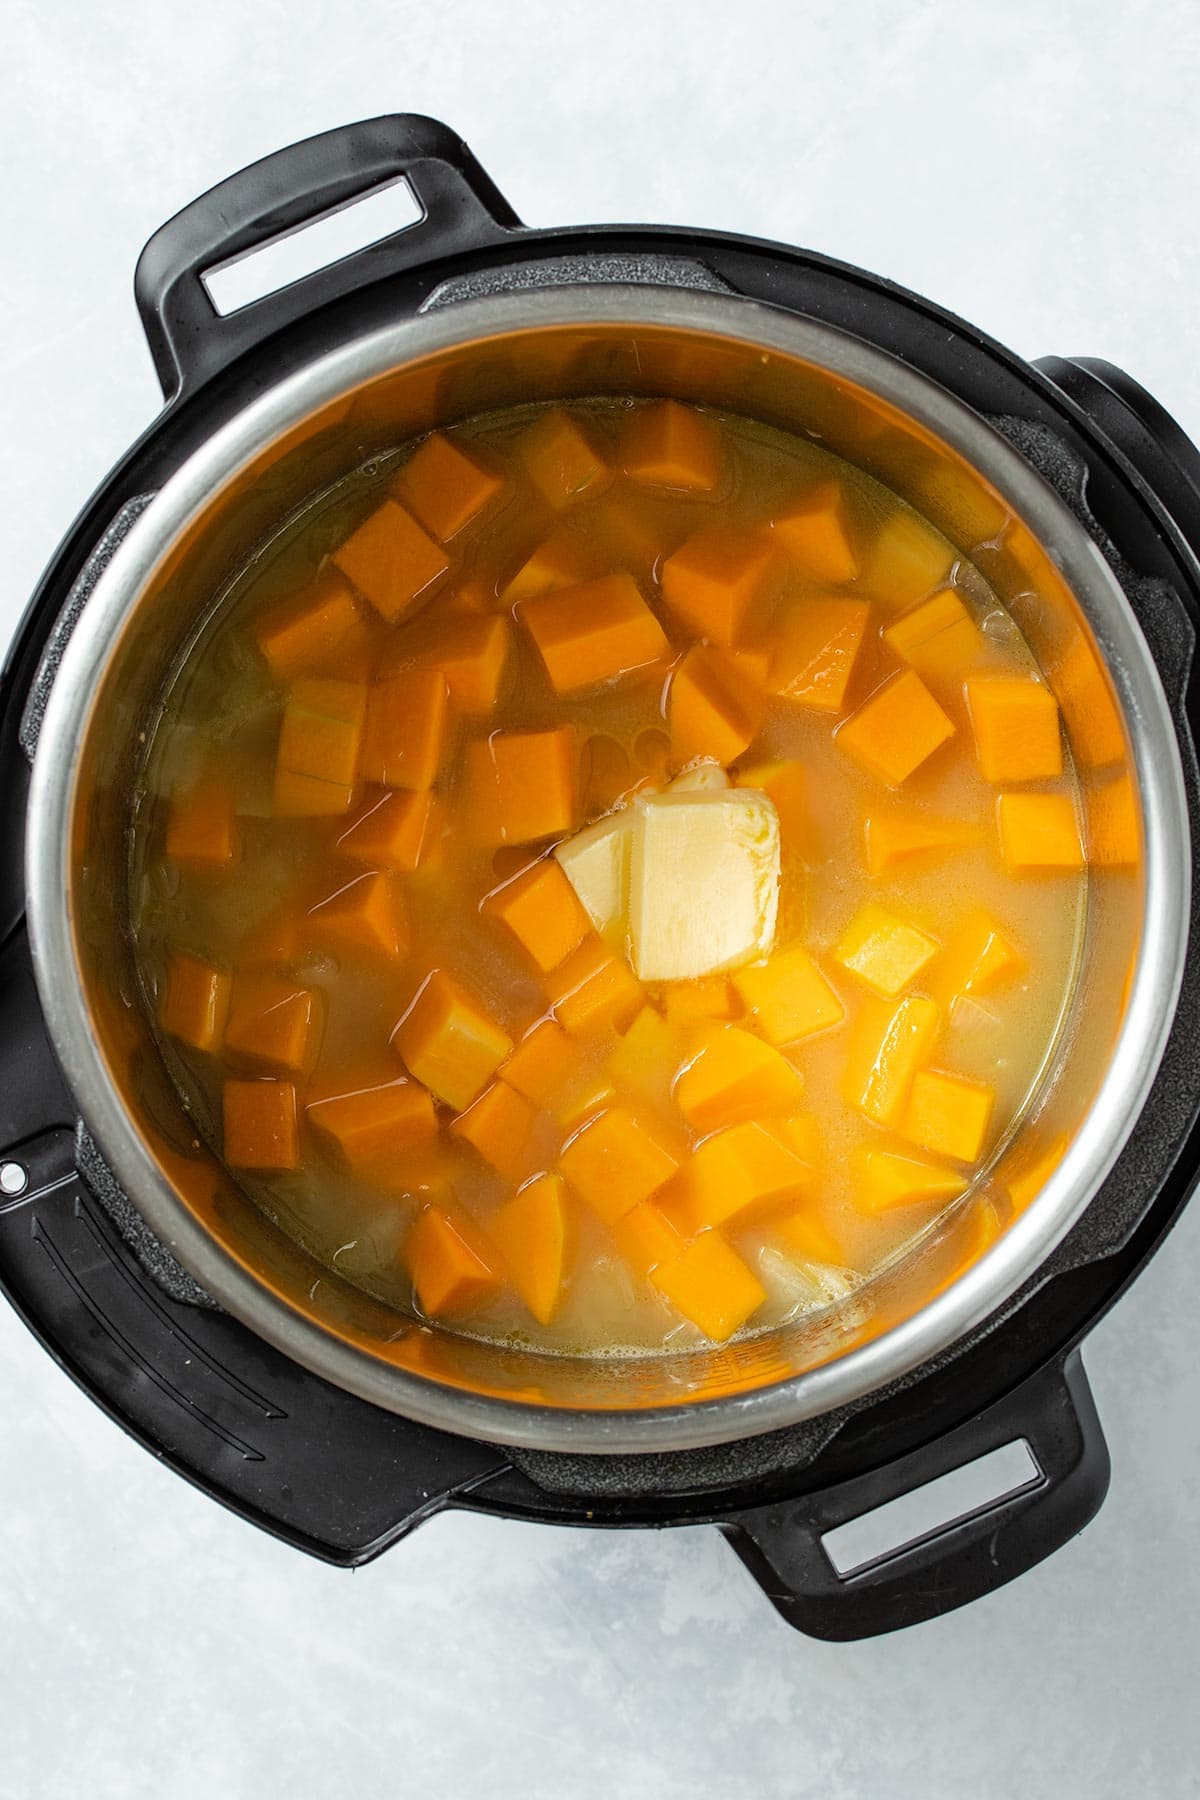 Uncooked diced butternut squash, arborio rice, butter and broth in an Instant Pot viewed from overhead.